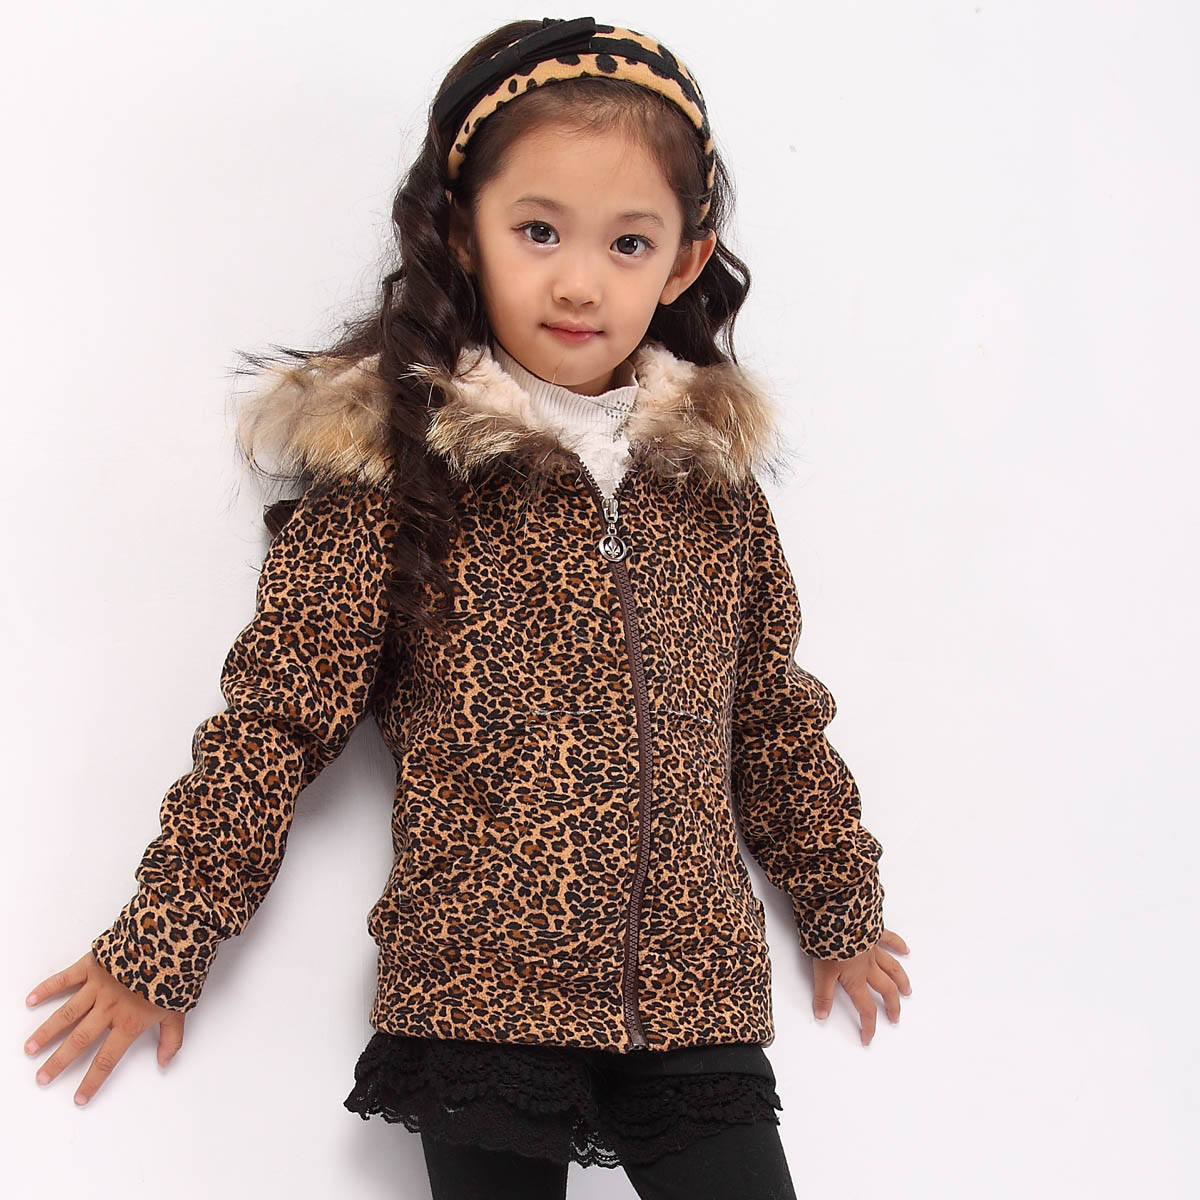 Children's clothing autumn and winter female child outerwear child thickening thermal autumn and winter overcoat fur with a hood